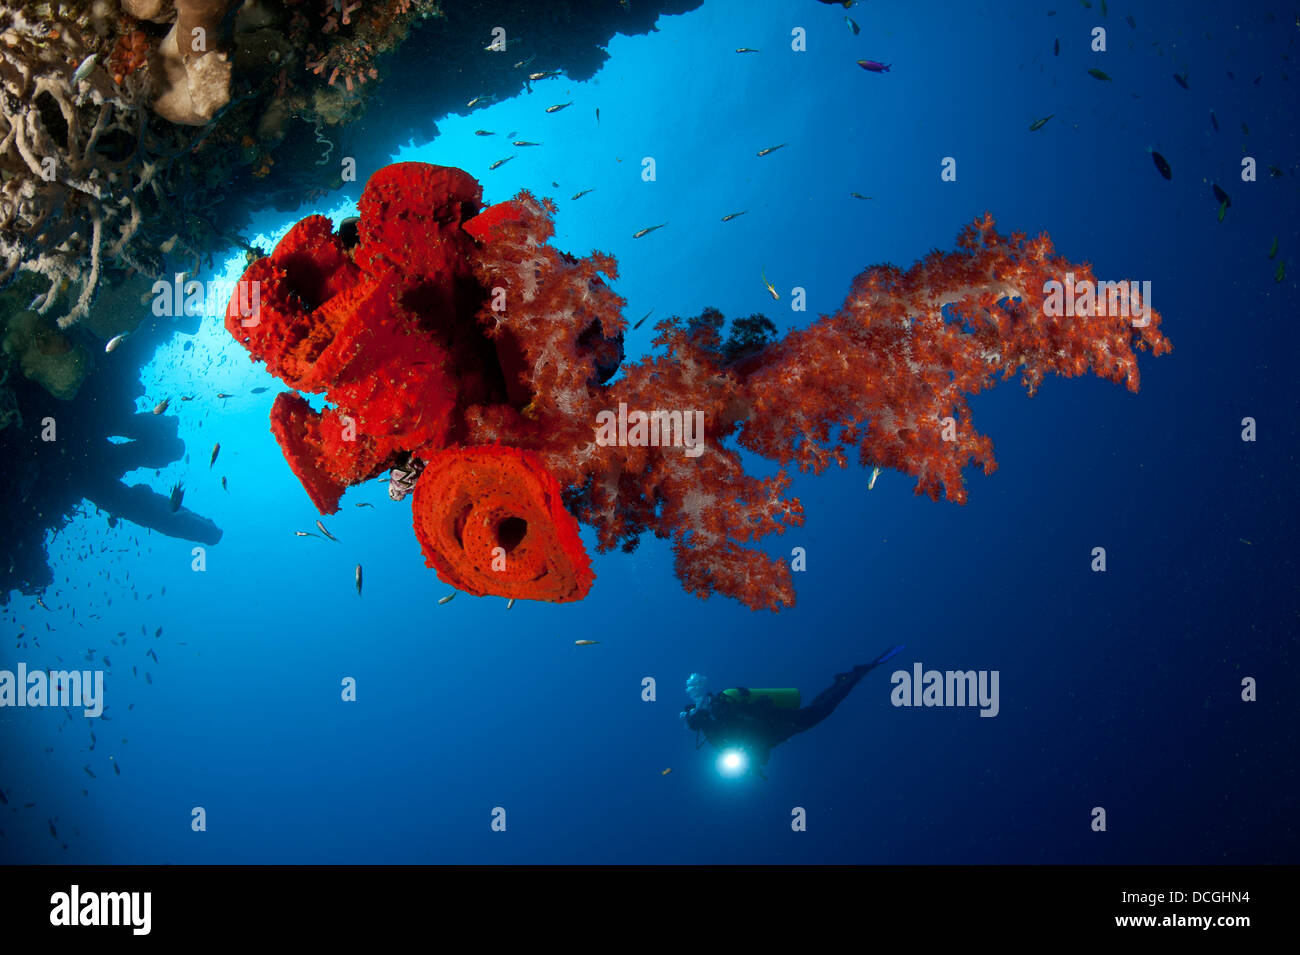 Diver looks on at a bright red soft coral and sponge hanging from a cave Stock Photo